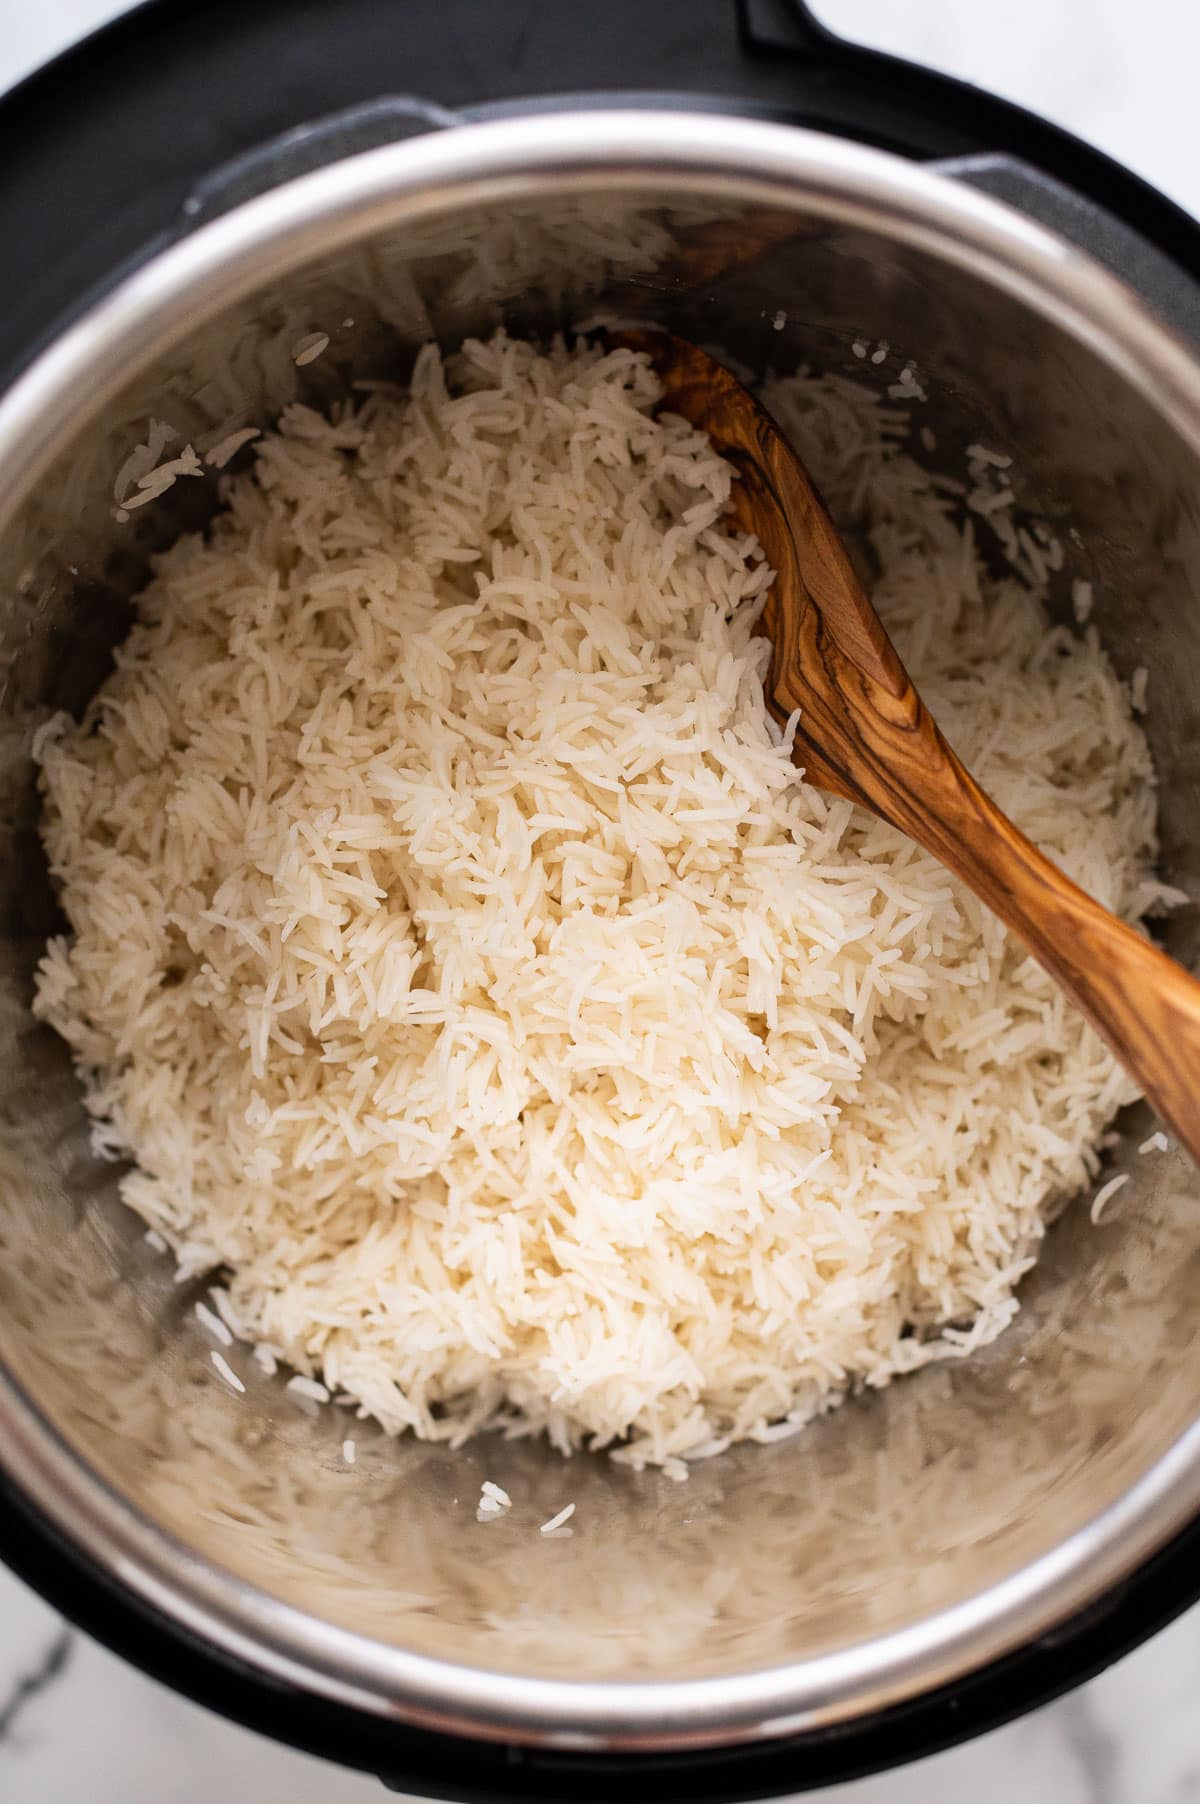 Basmati rice in instant pot with wooden spoon.